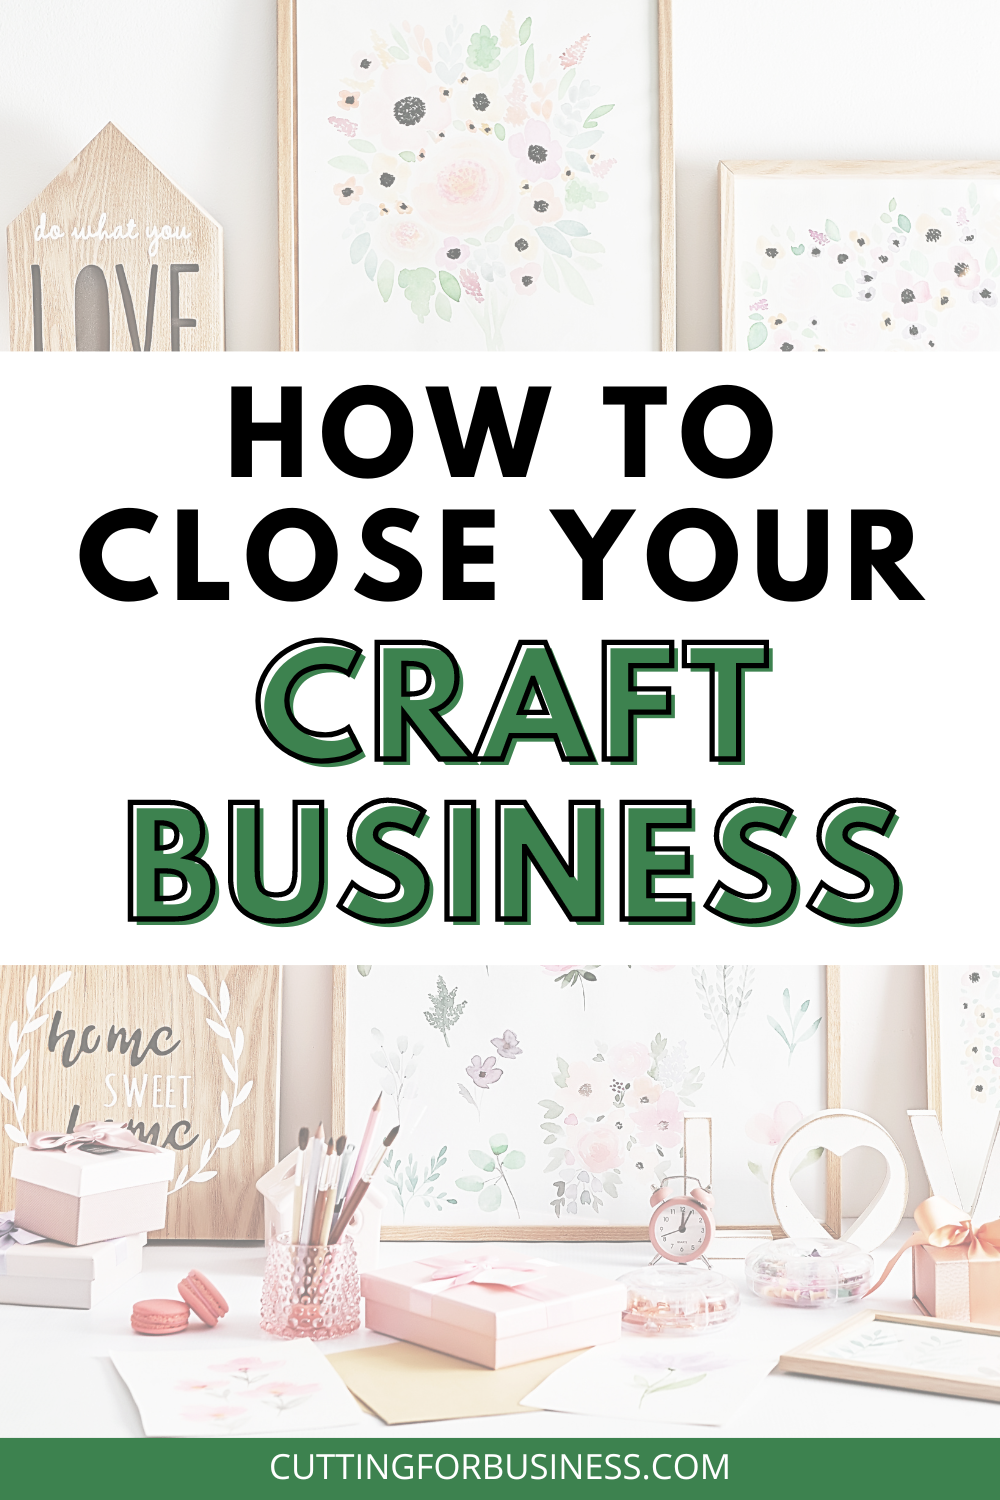 How to Close Your Craft Business with Free Printable Checklists - cuttingforbusiness.com.